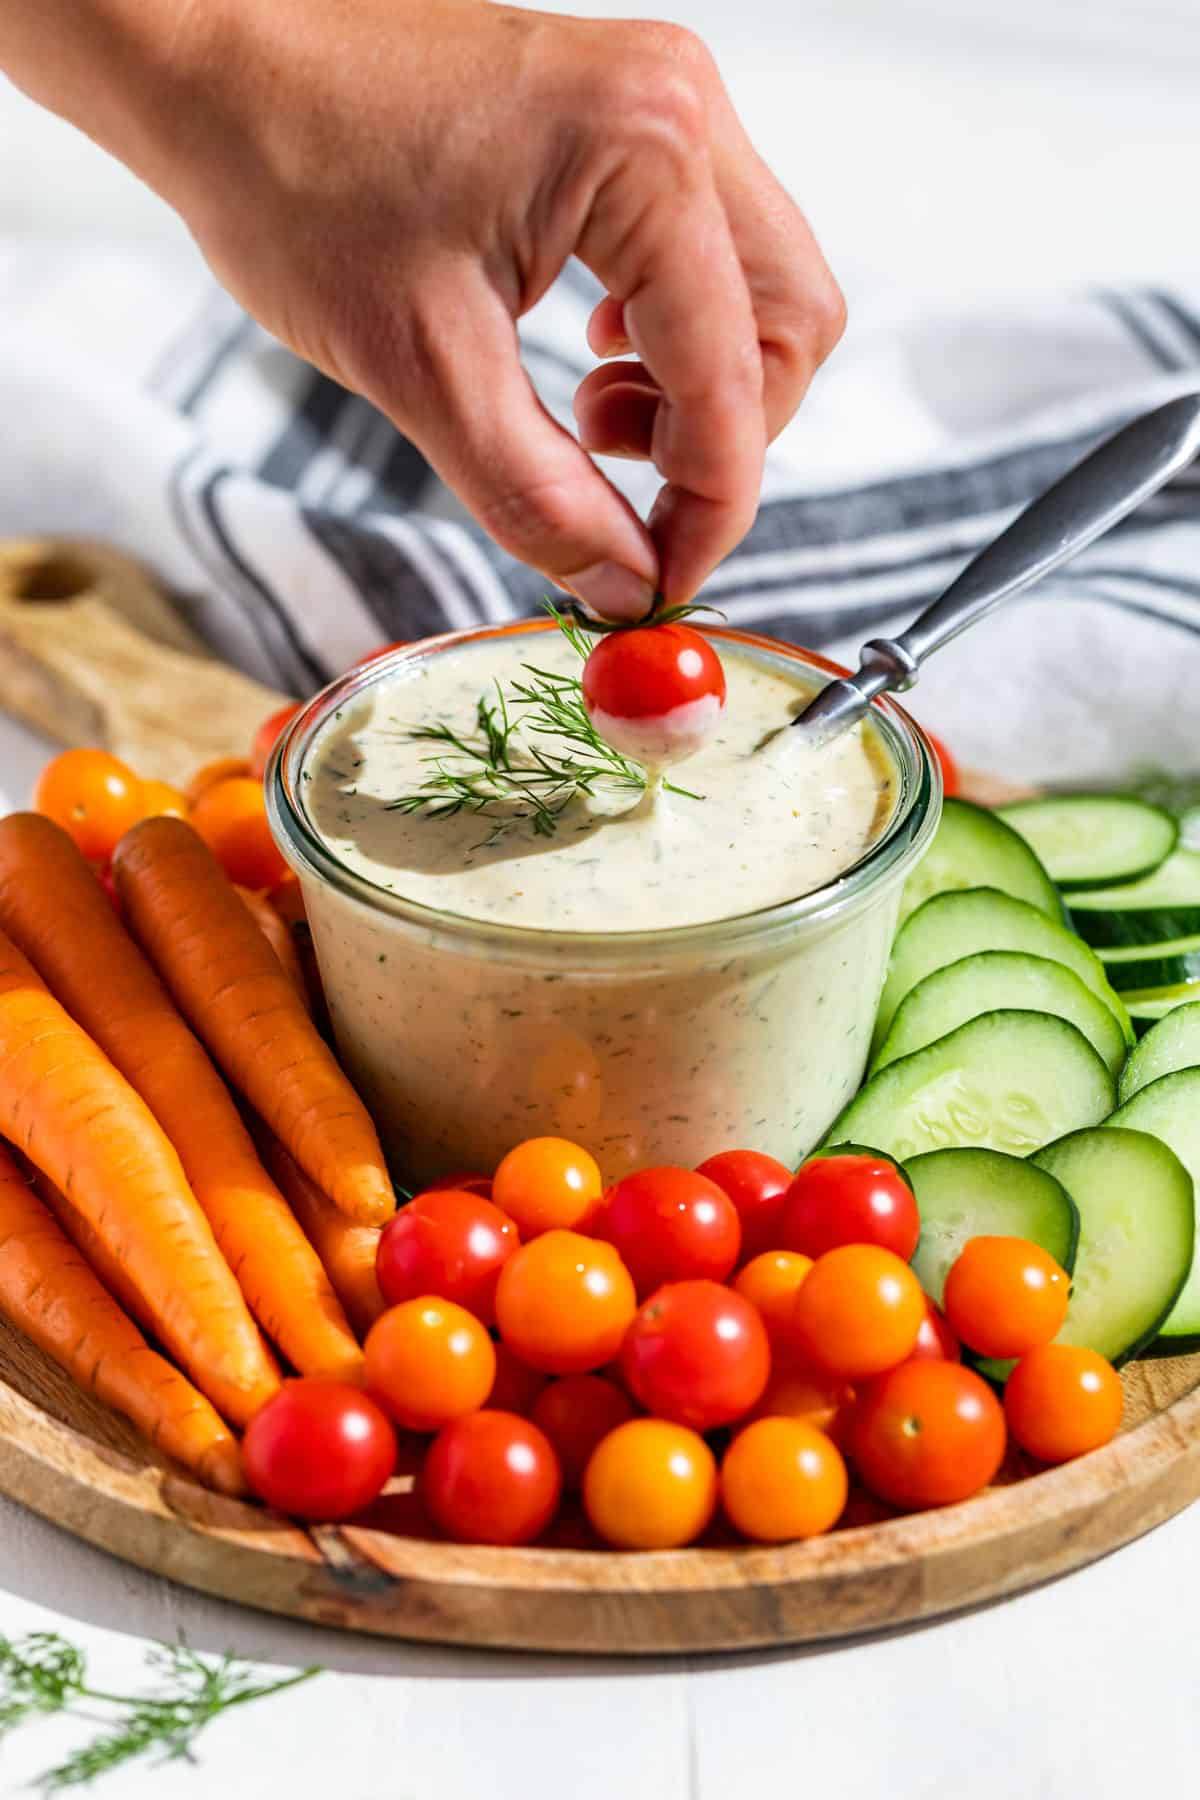 A hand dipping a cherry tomato in a container of ranch dressing surrounded by cut veggies.